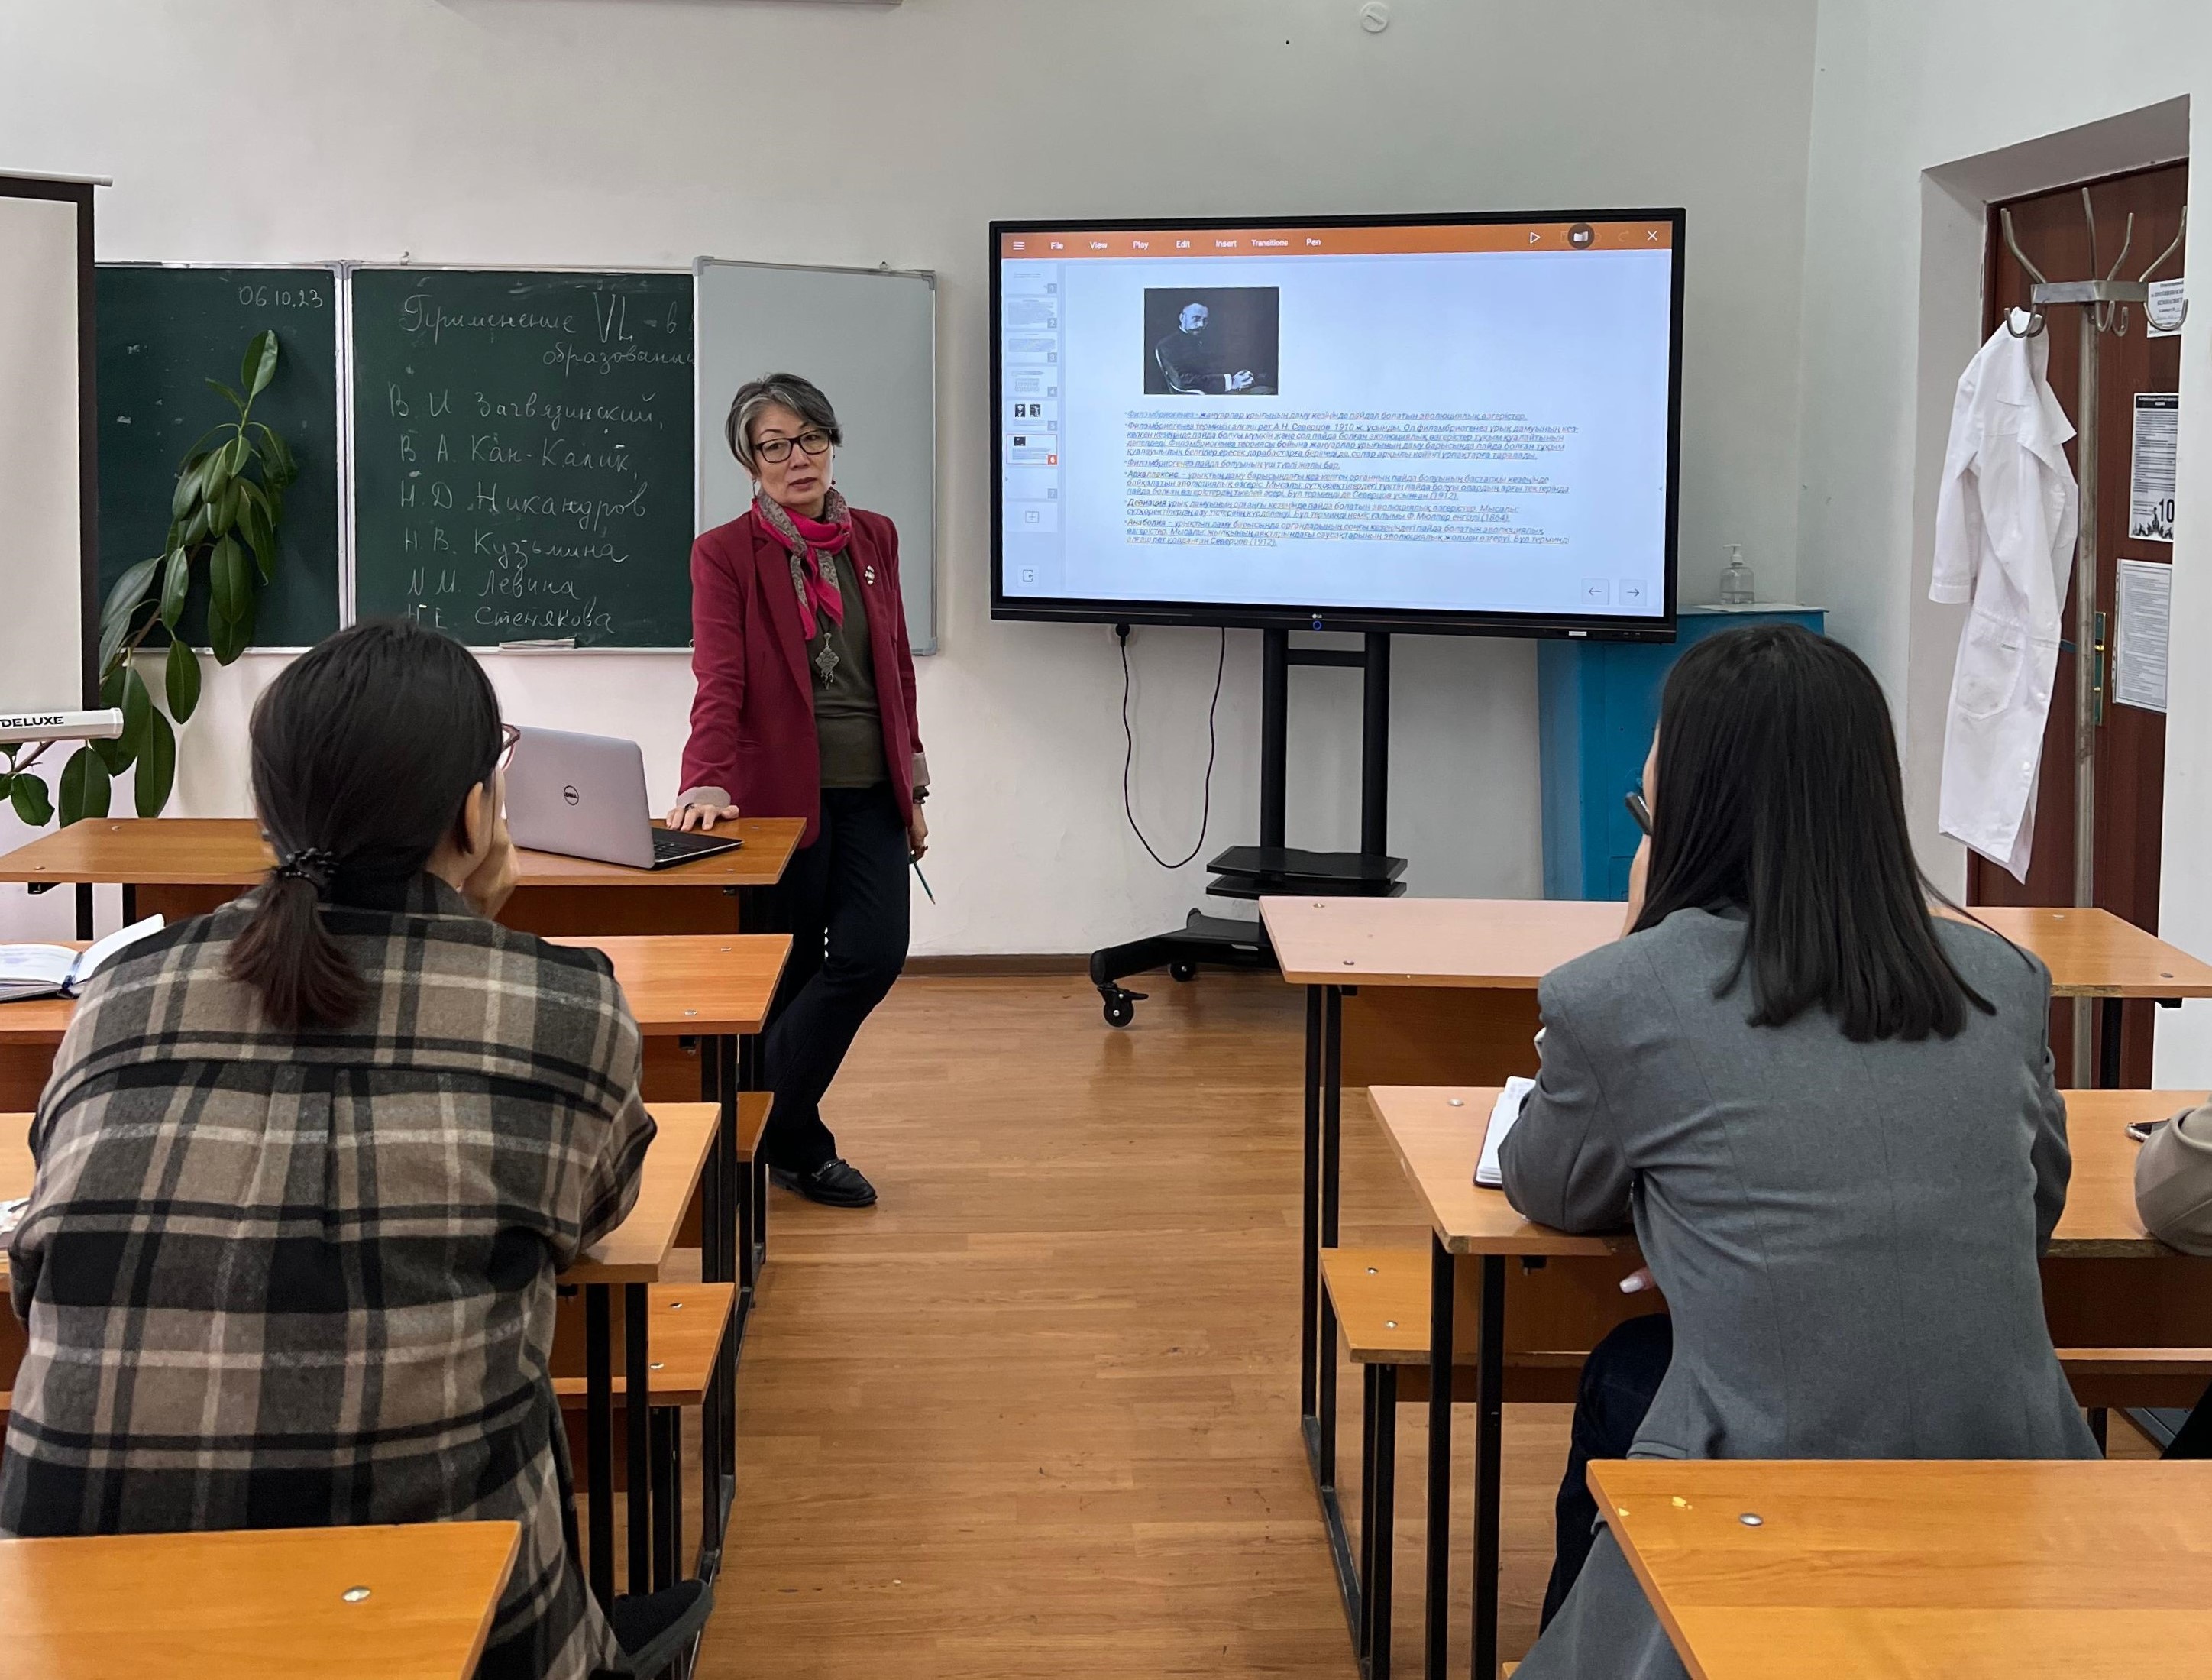 Senior lecturer Tormanova A.N. conducted a lecture within the framework of SDG 3 on the topic "Anti-stress-relax"